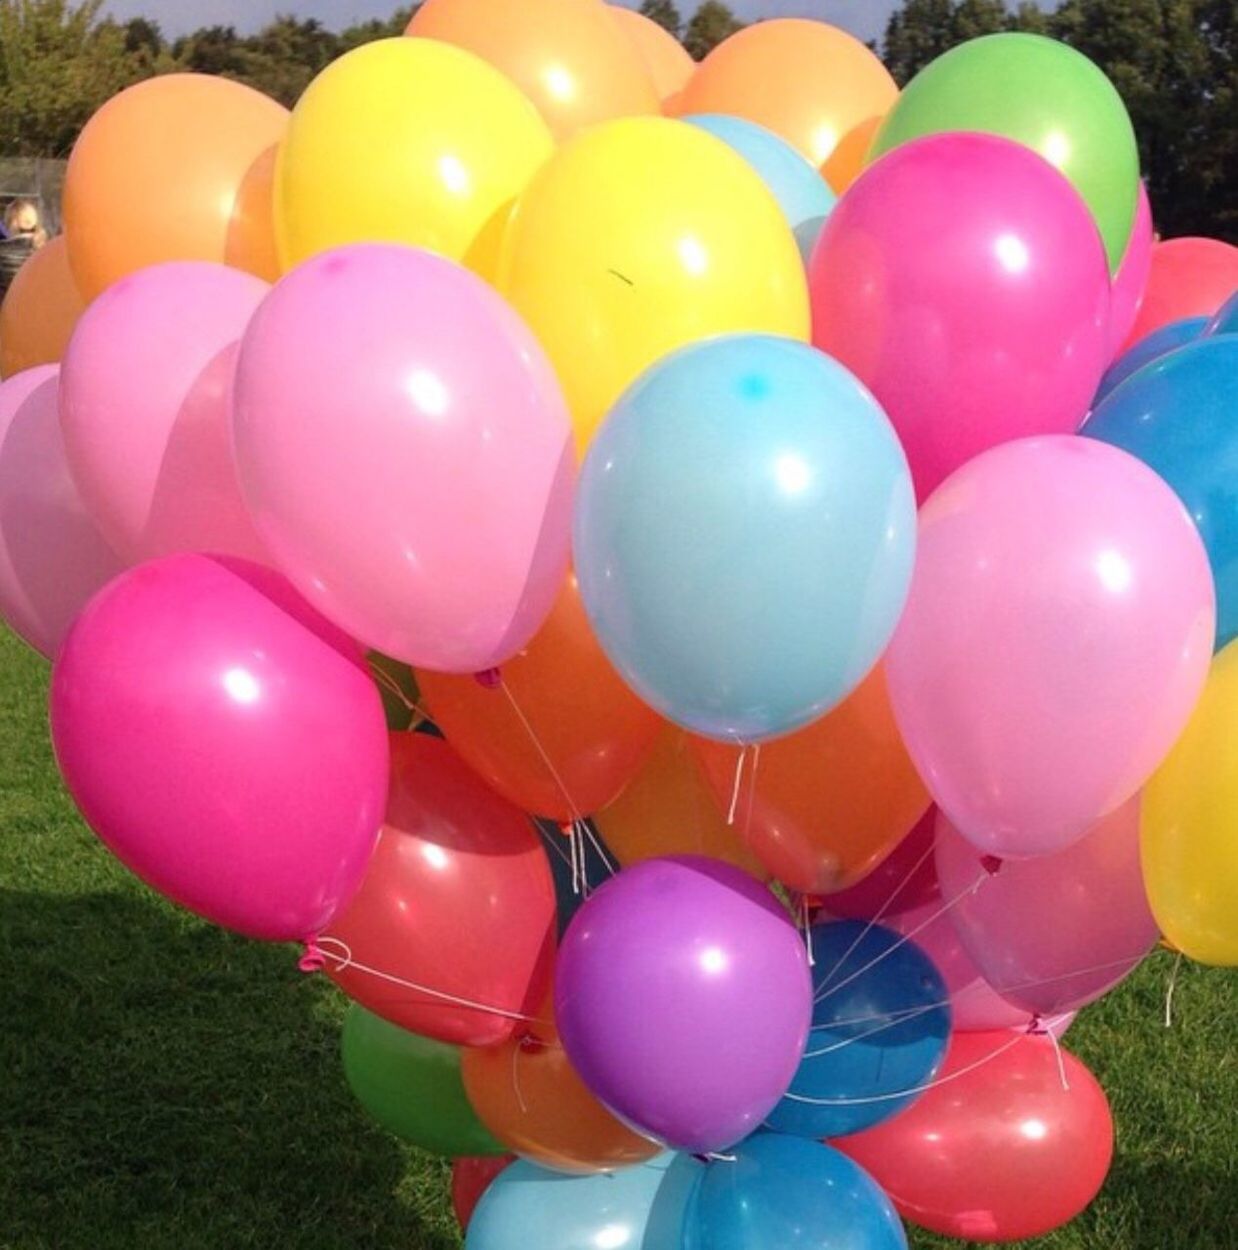 MULTI COLORED BALLOONS IN COLORFUL BALLOON